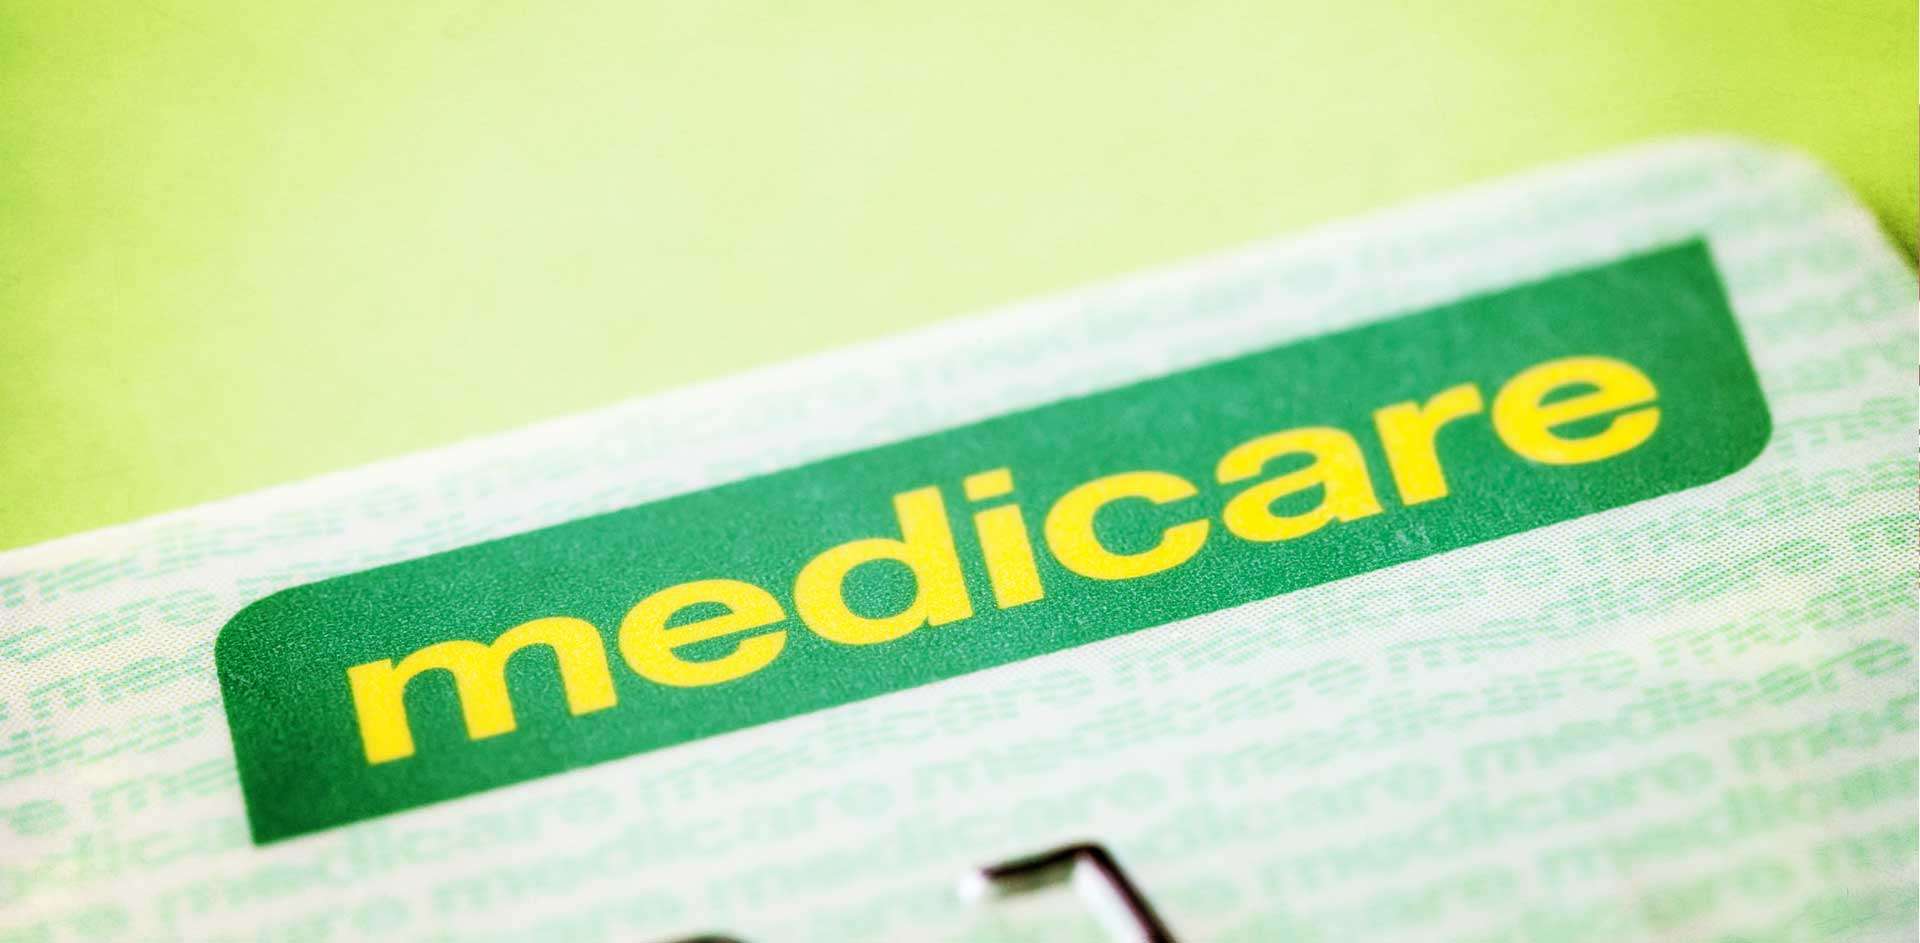 Medicare card representing Medicare Referrals to manage various psychological conditions